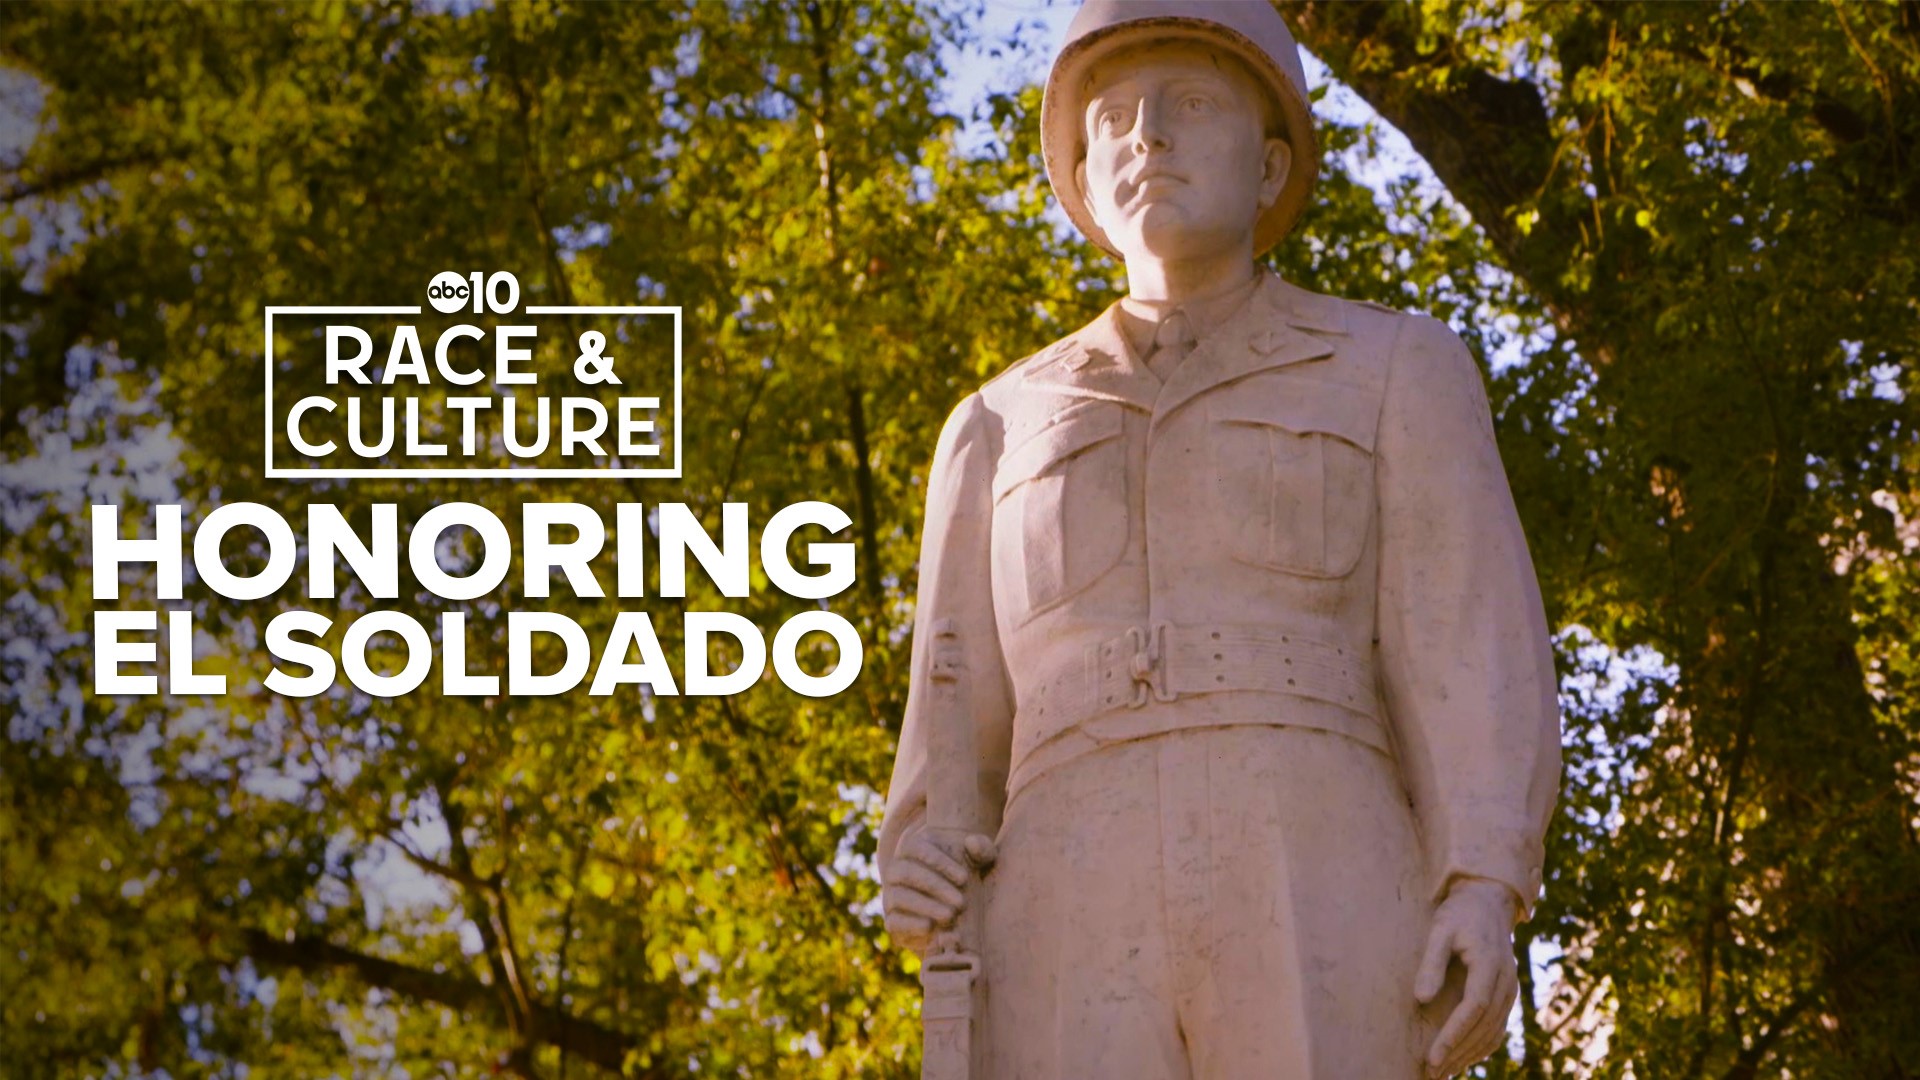 Shedding light on Latino service members and the enduring dream of mothers who lost their sons.